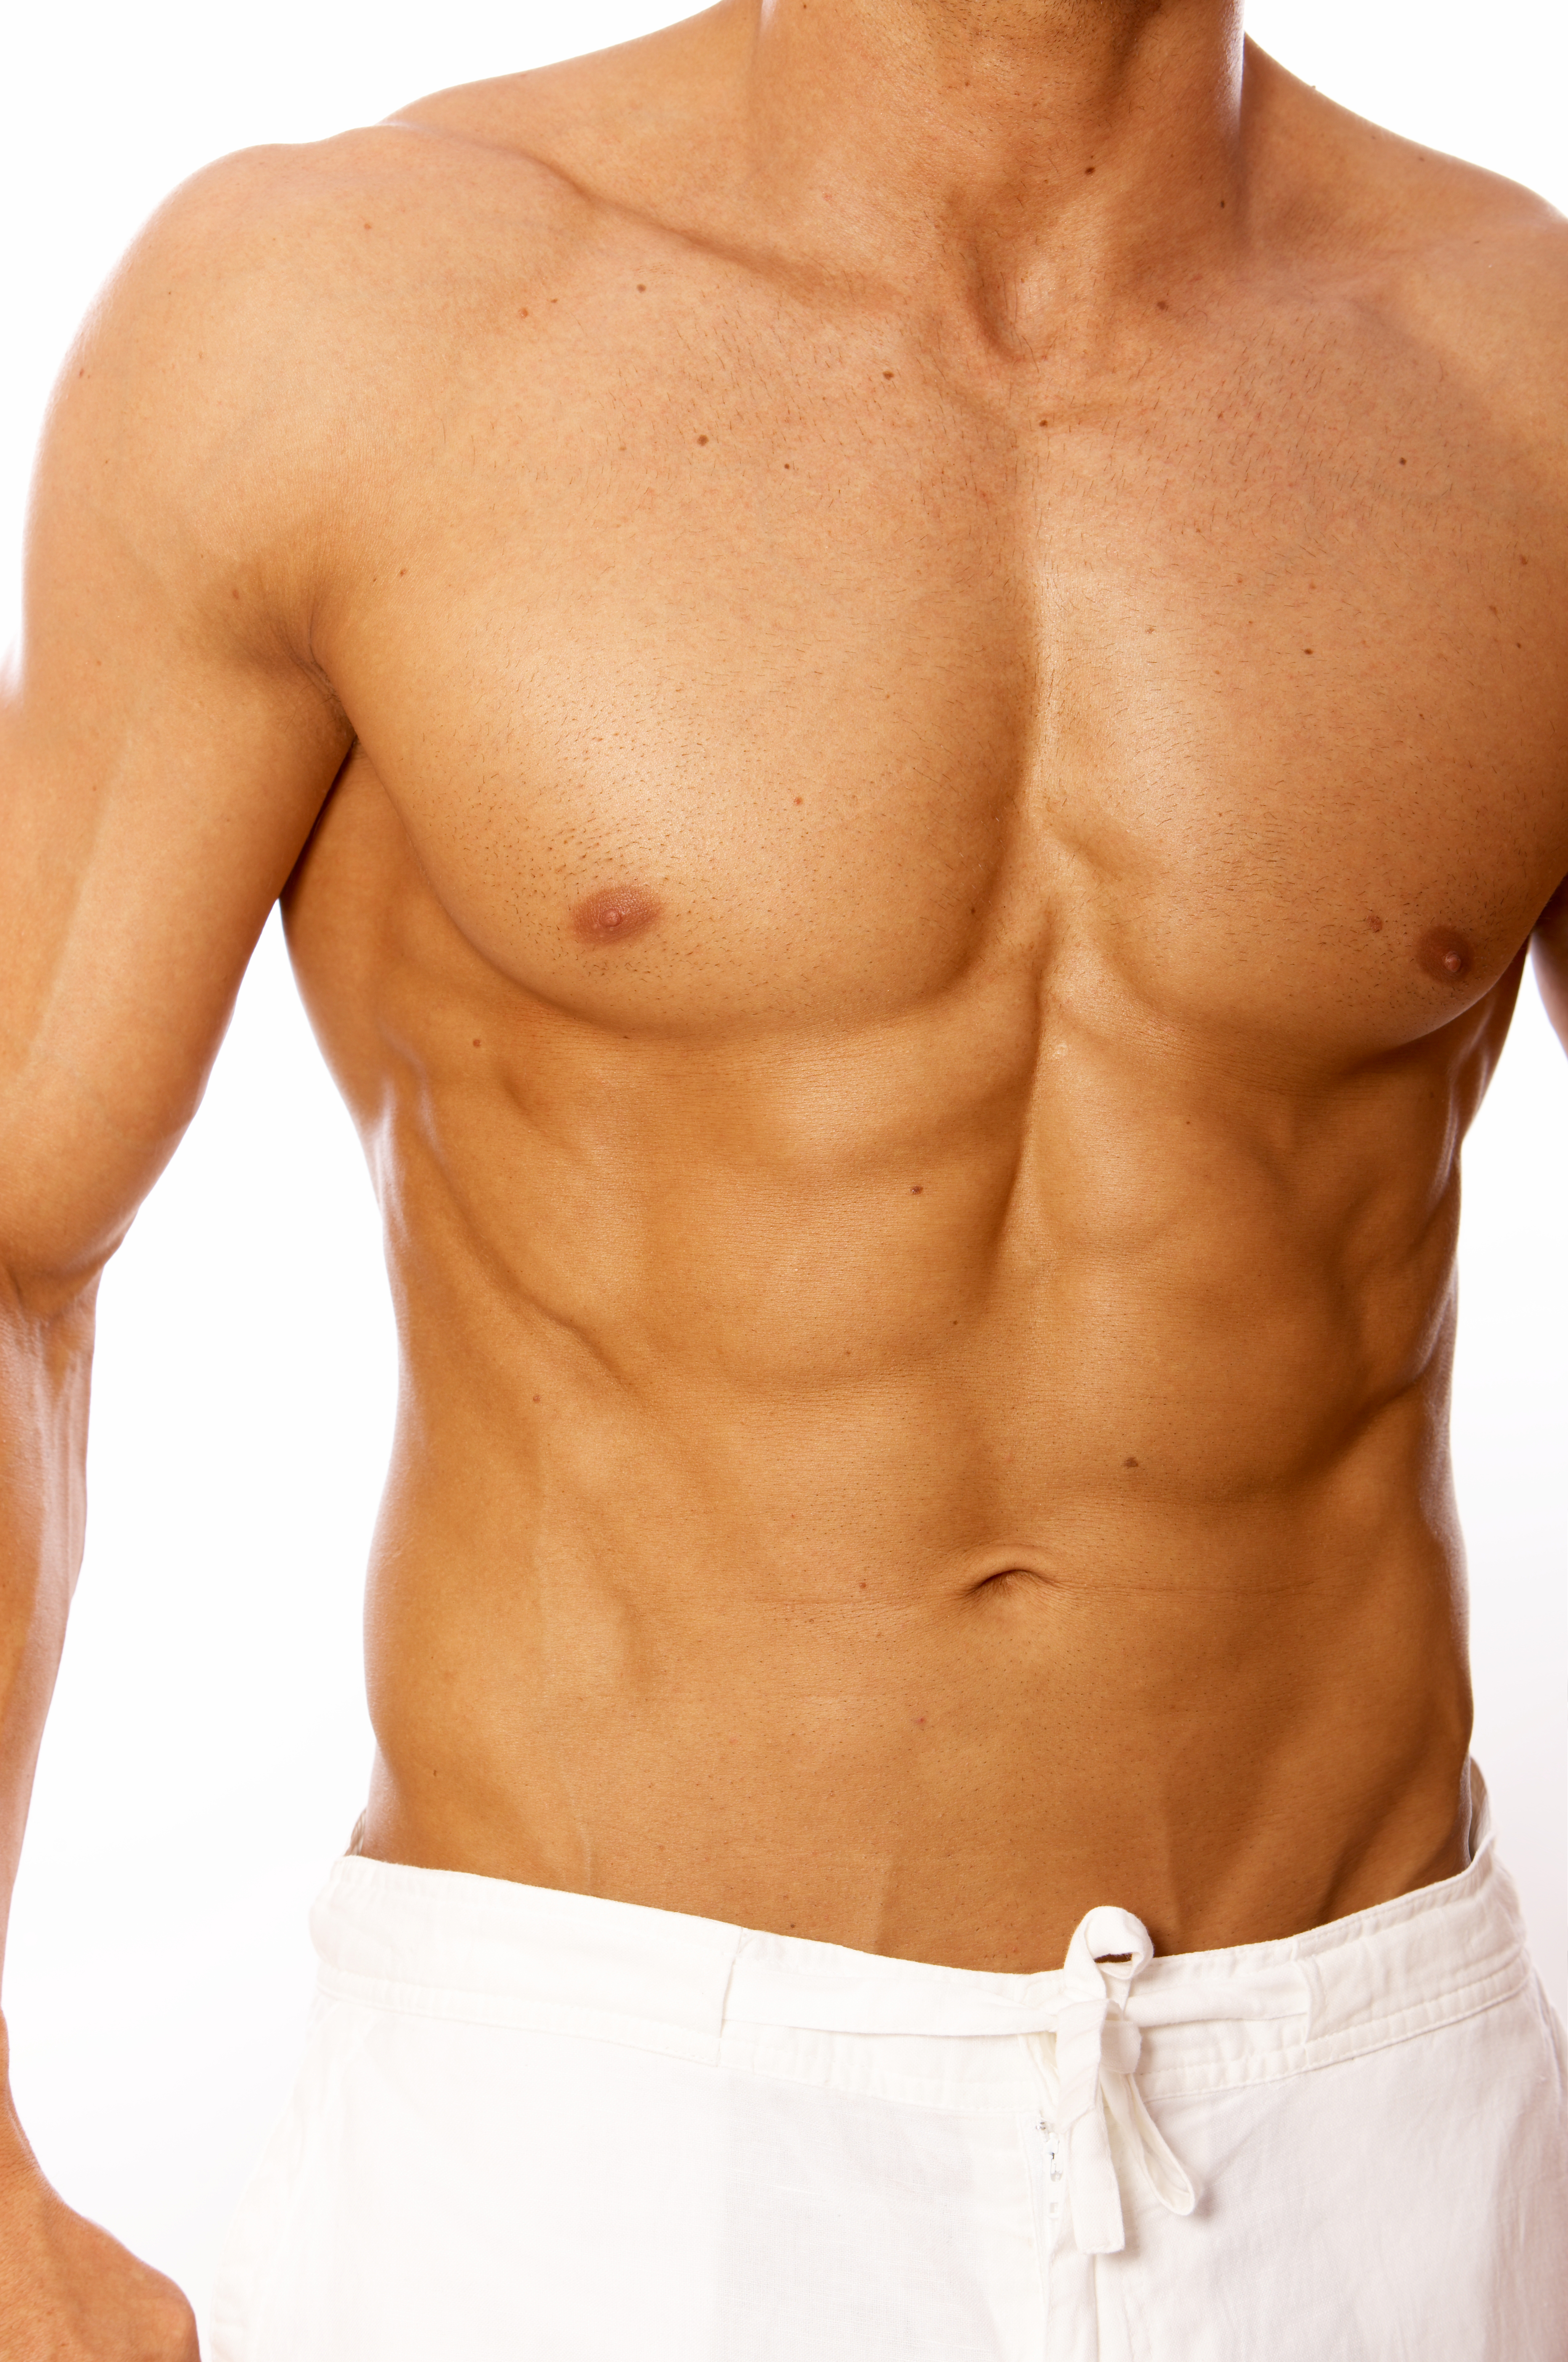 Male Breast Reduction (Gynecomastia) Plastic Surgery - Types, Cost, Recovery, & Risks